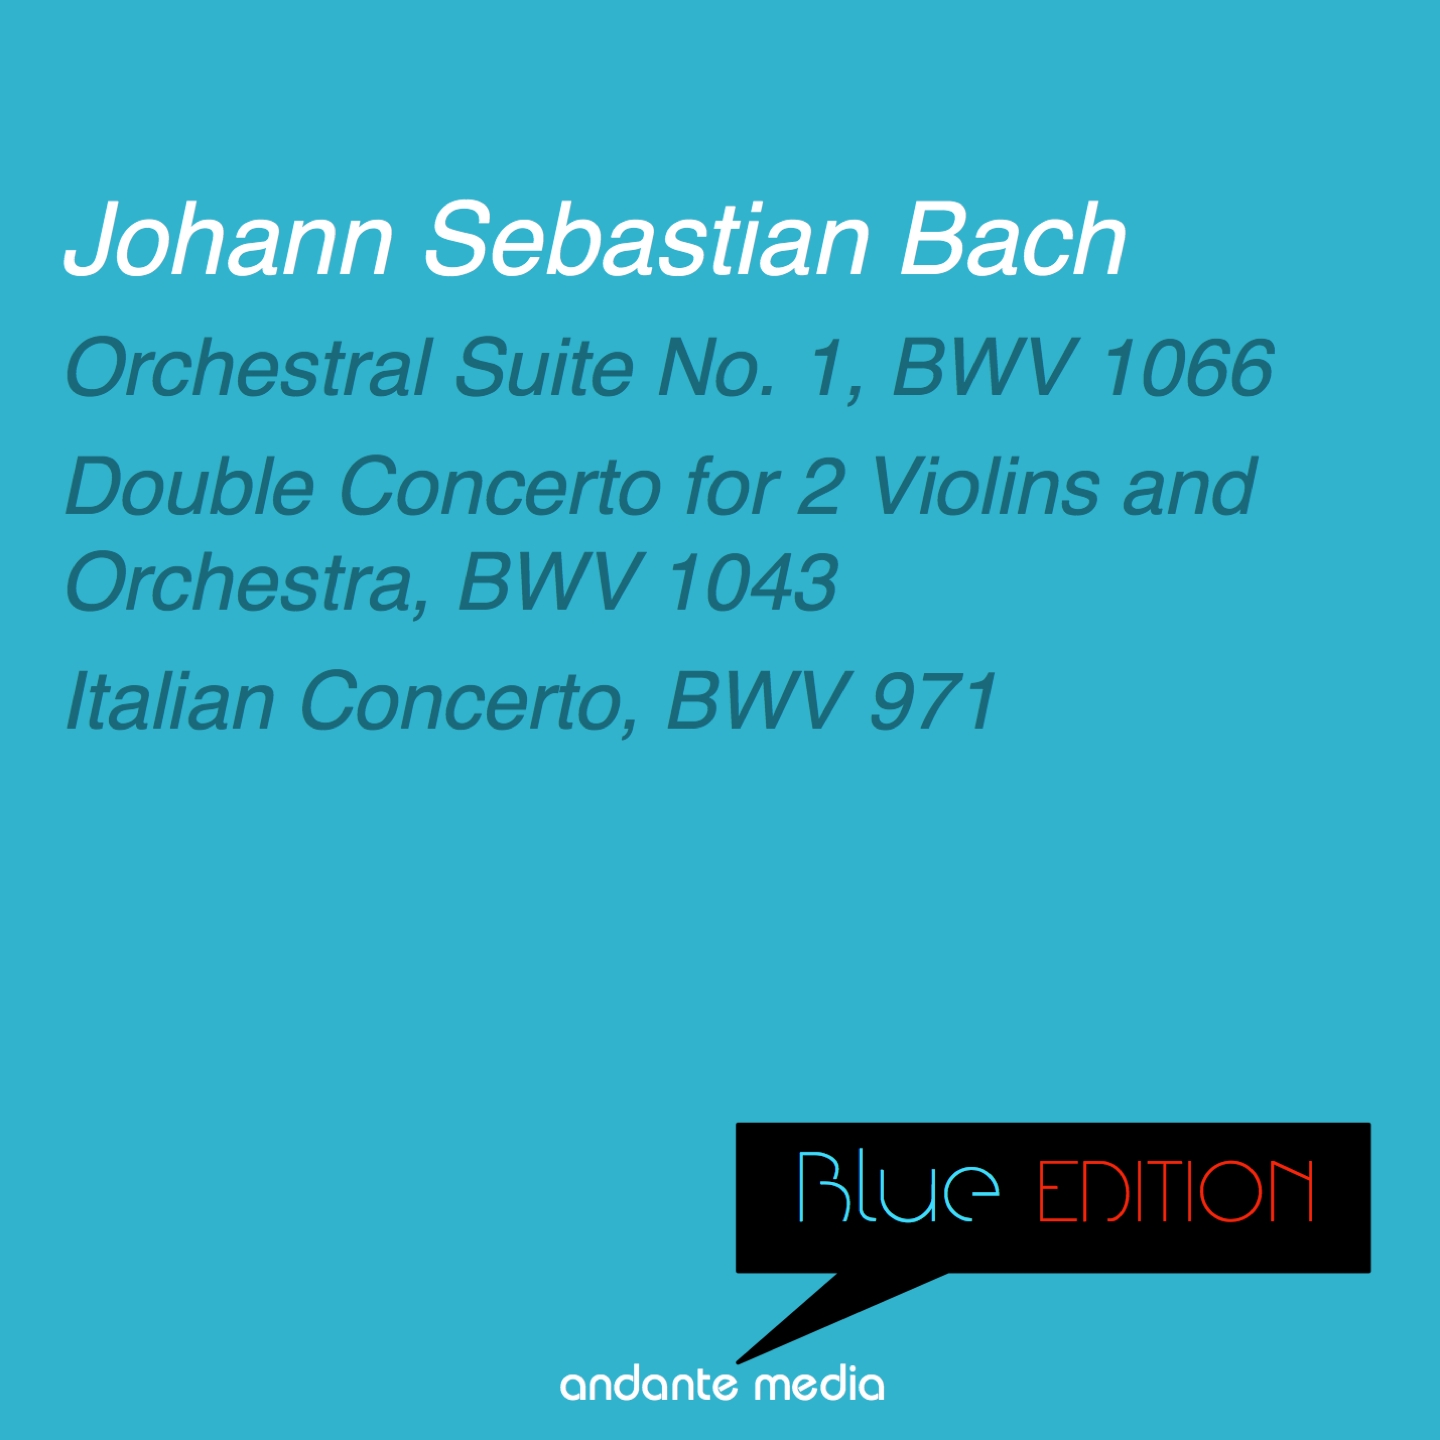 Double Concerto for 2 Violins and Orchestra in D Minor, BWV 1043: I. Vivace